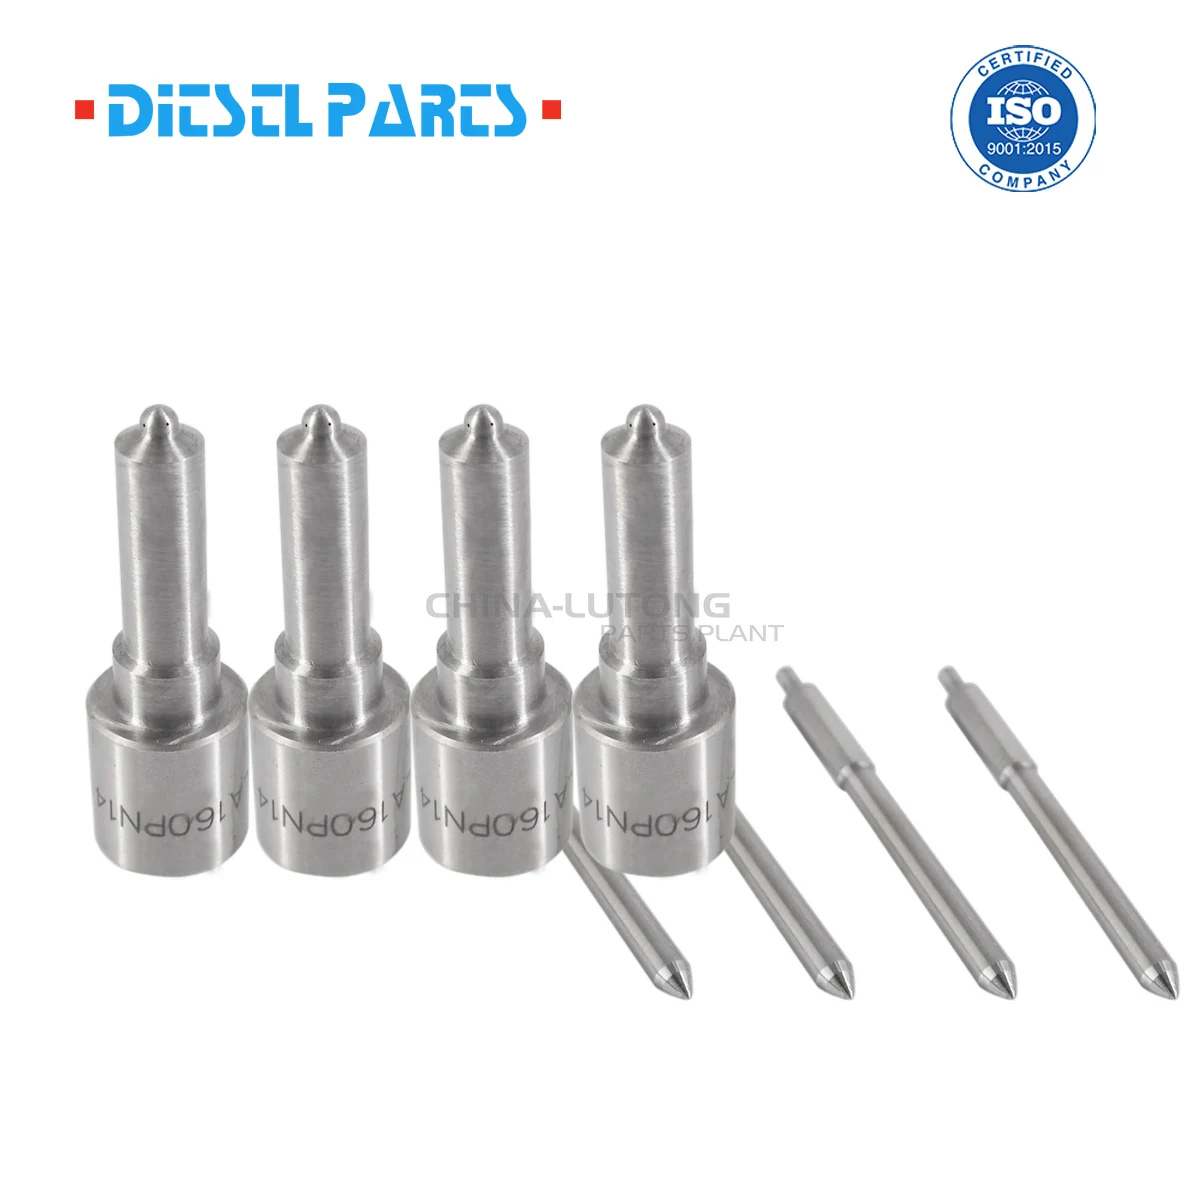 

105017-1410 Fuel Injection Nozzle DLLA160PN141/9432610374 PN Type Diesel Injector Nozzle Tips For MITSUBISHI HYUNDAI